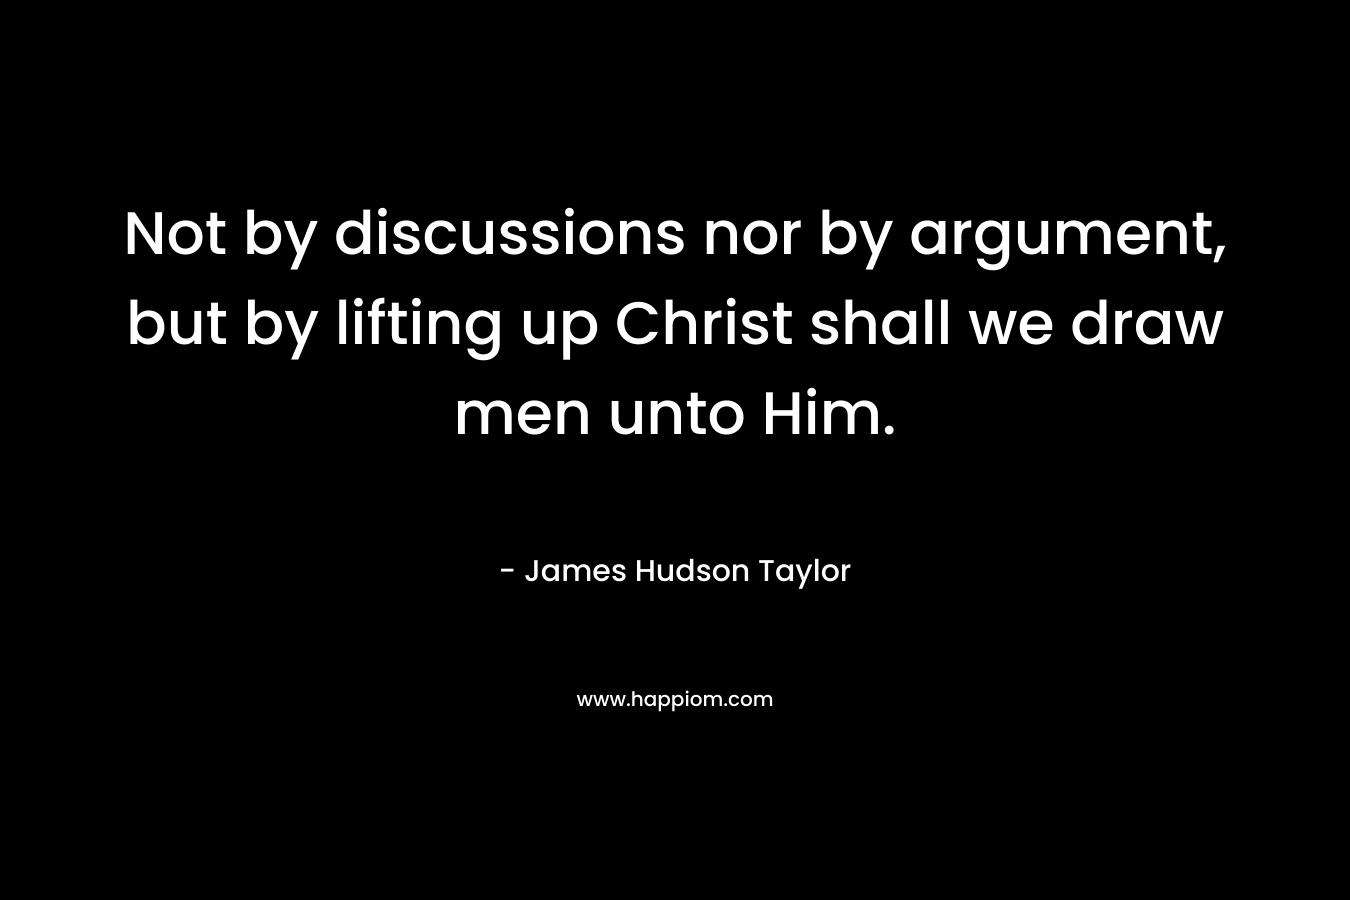 Not by discussions nor by argument, but by lifting up Christ shall we draw men unto Him. – James Hudson Taylor